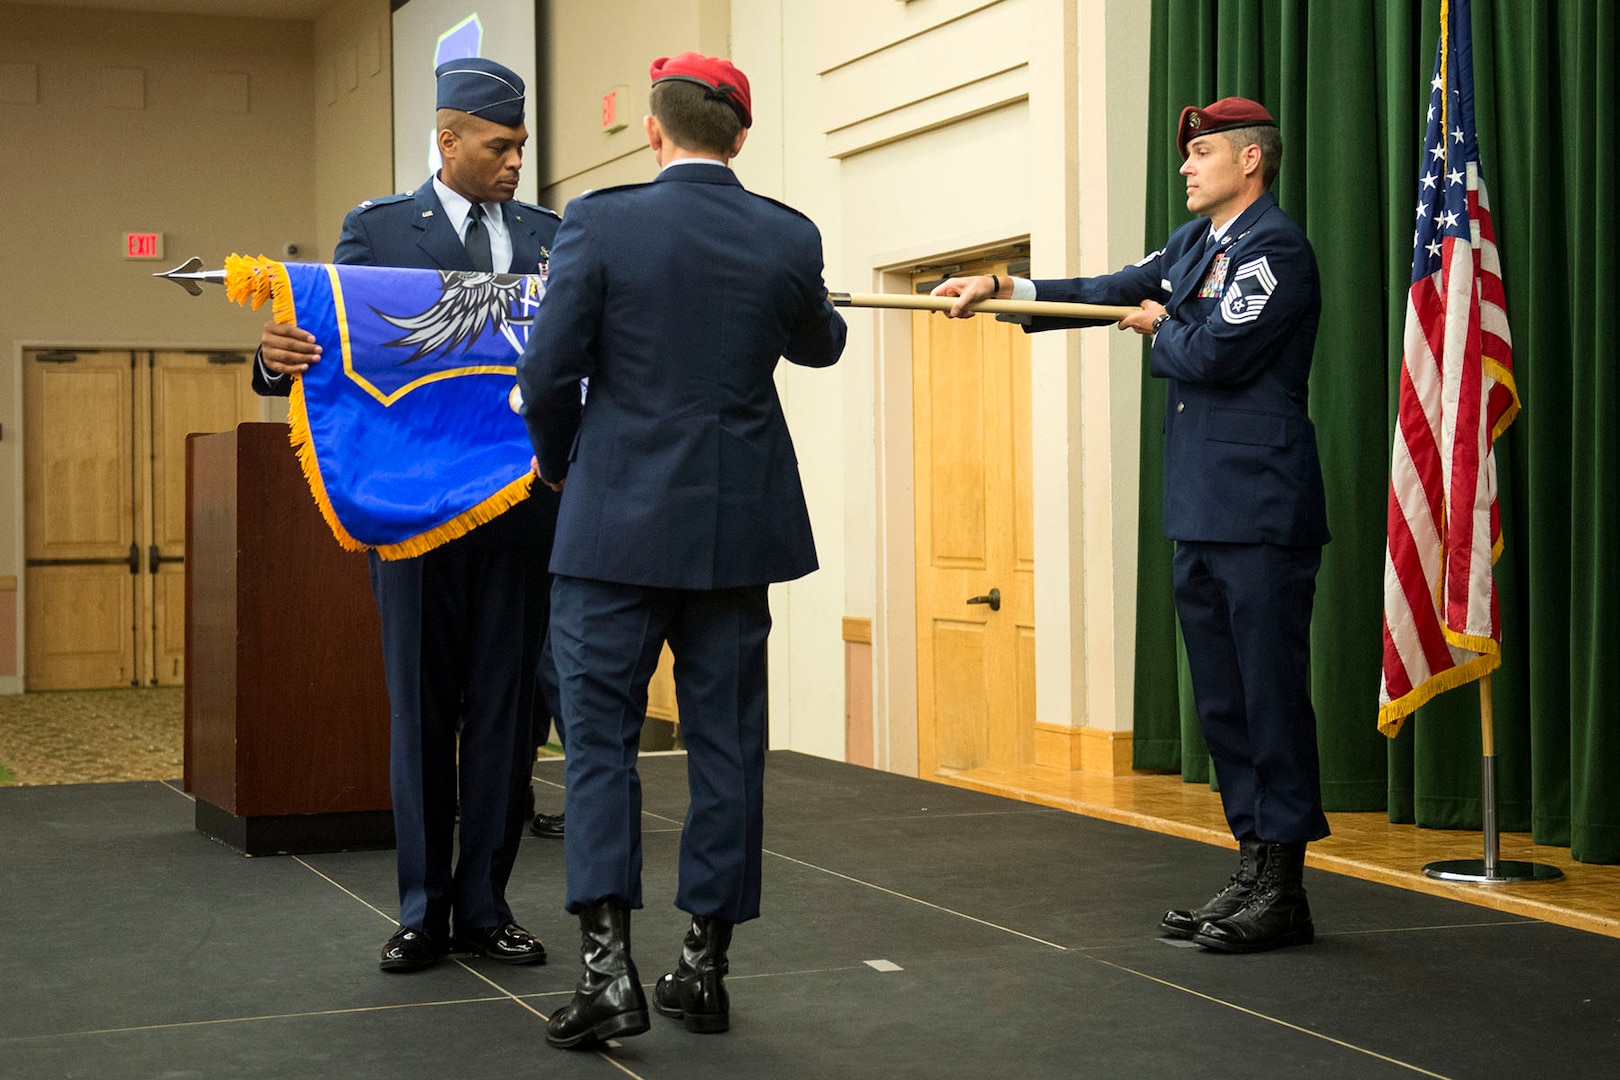 Chief Master Sgt. Ronald Thompson, at right, chief enlisted advisor for the Battlefield Airman Training Group, unfurls the BA TG guidon for Col. Ronald Stenger, incoming commander of the BA TG, left, and Col. Roy Collins, commander of the 37th Training Wing, right, during the group’s activation ceremony June 2, 2016, at Joint Base San Antonio-Lackland, Texas. As a result, BA training, which is currently located across eight locations in seven states, will streamline the training pipeline to reduce costs, and lead to improvements and synergies in the process.